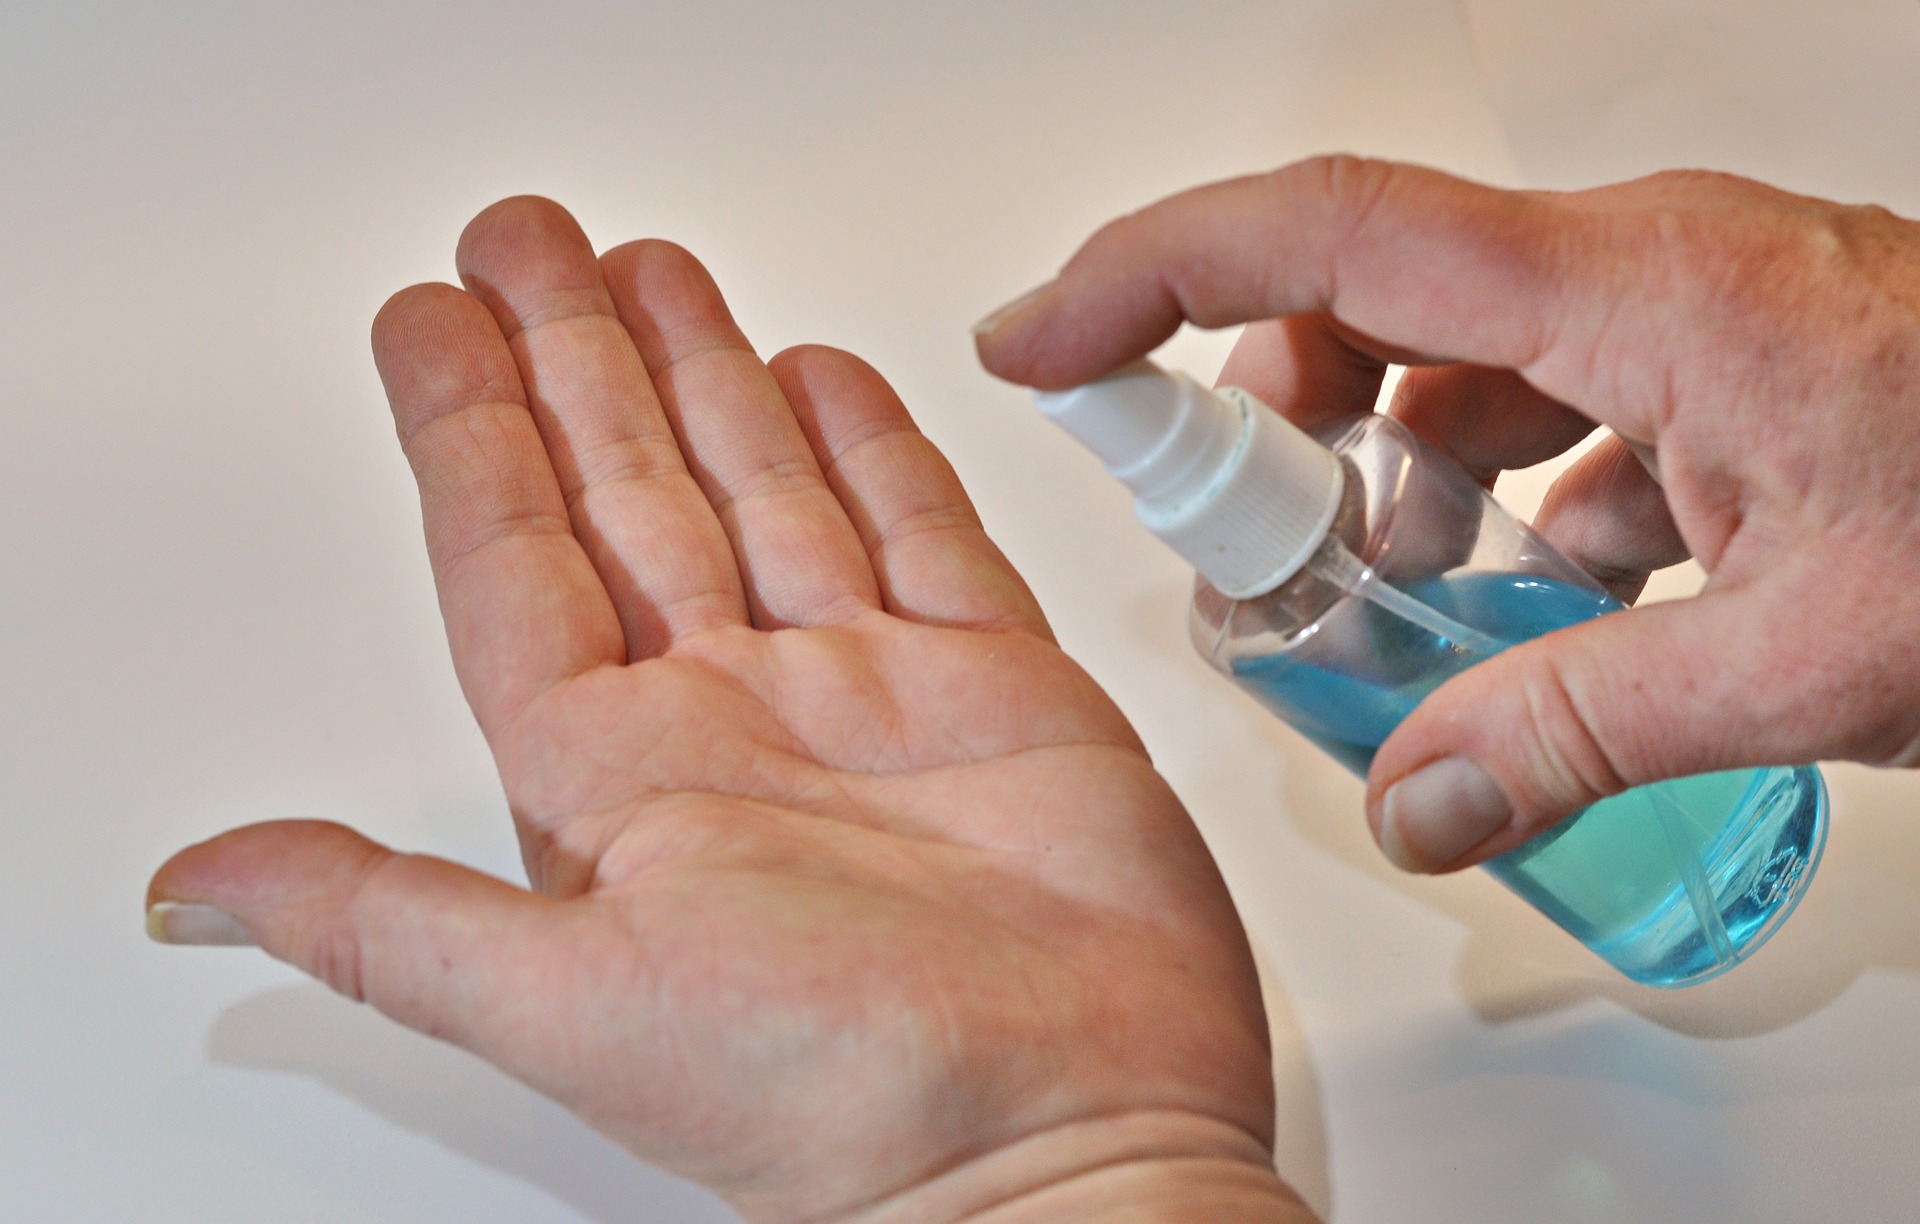 FDA Warns Public About Hand Sanitizers -They Look Like Food Or Beverages